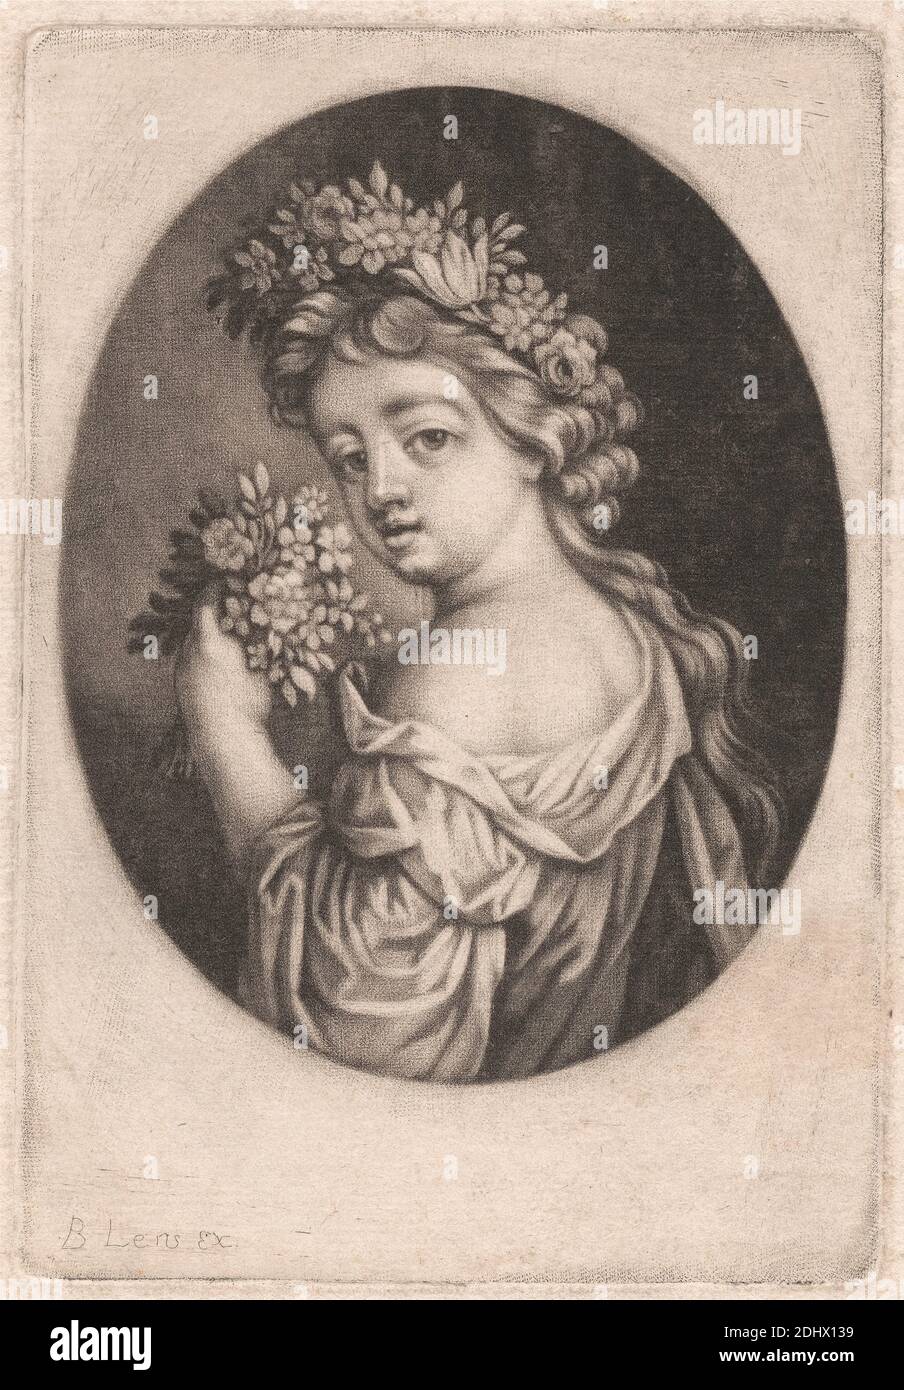 Flora, Print made by Bernard Lens, 1659–1725, British, undated, Mezzotint, etched letter proof on medium, moderately textured, blued white, laid paper, Sheet: 5 1/2 × 3 7/8 inches (14 × 9.8 cm), Plate: 4 15/16 × 3 7/16 inches (12.5 × 8.7 cm), and Image: 3 15/16 × 3 1/8 inches (10 × 7.9 cm), dress, flowers, gazing, girl, goddess, religious and mythological subject, shoulder, wreath Stock Photo